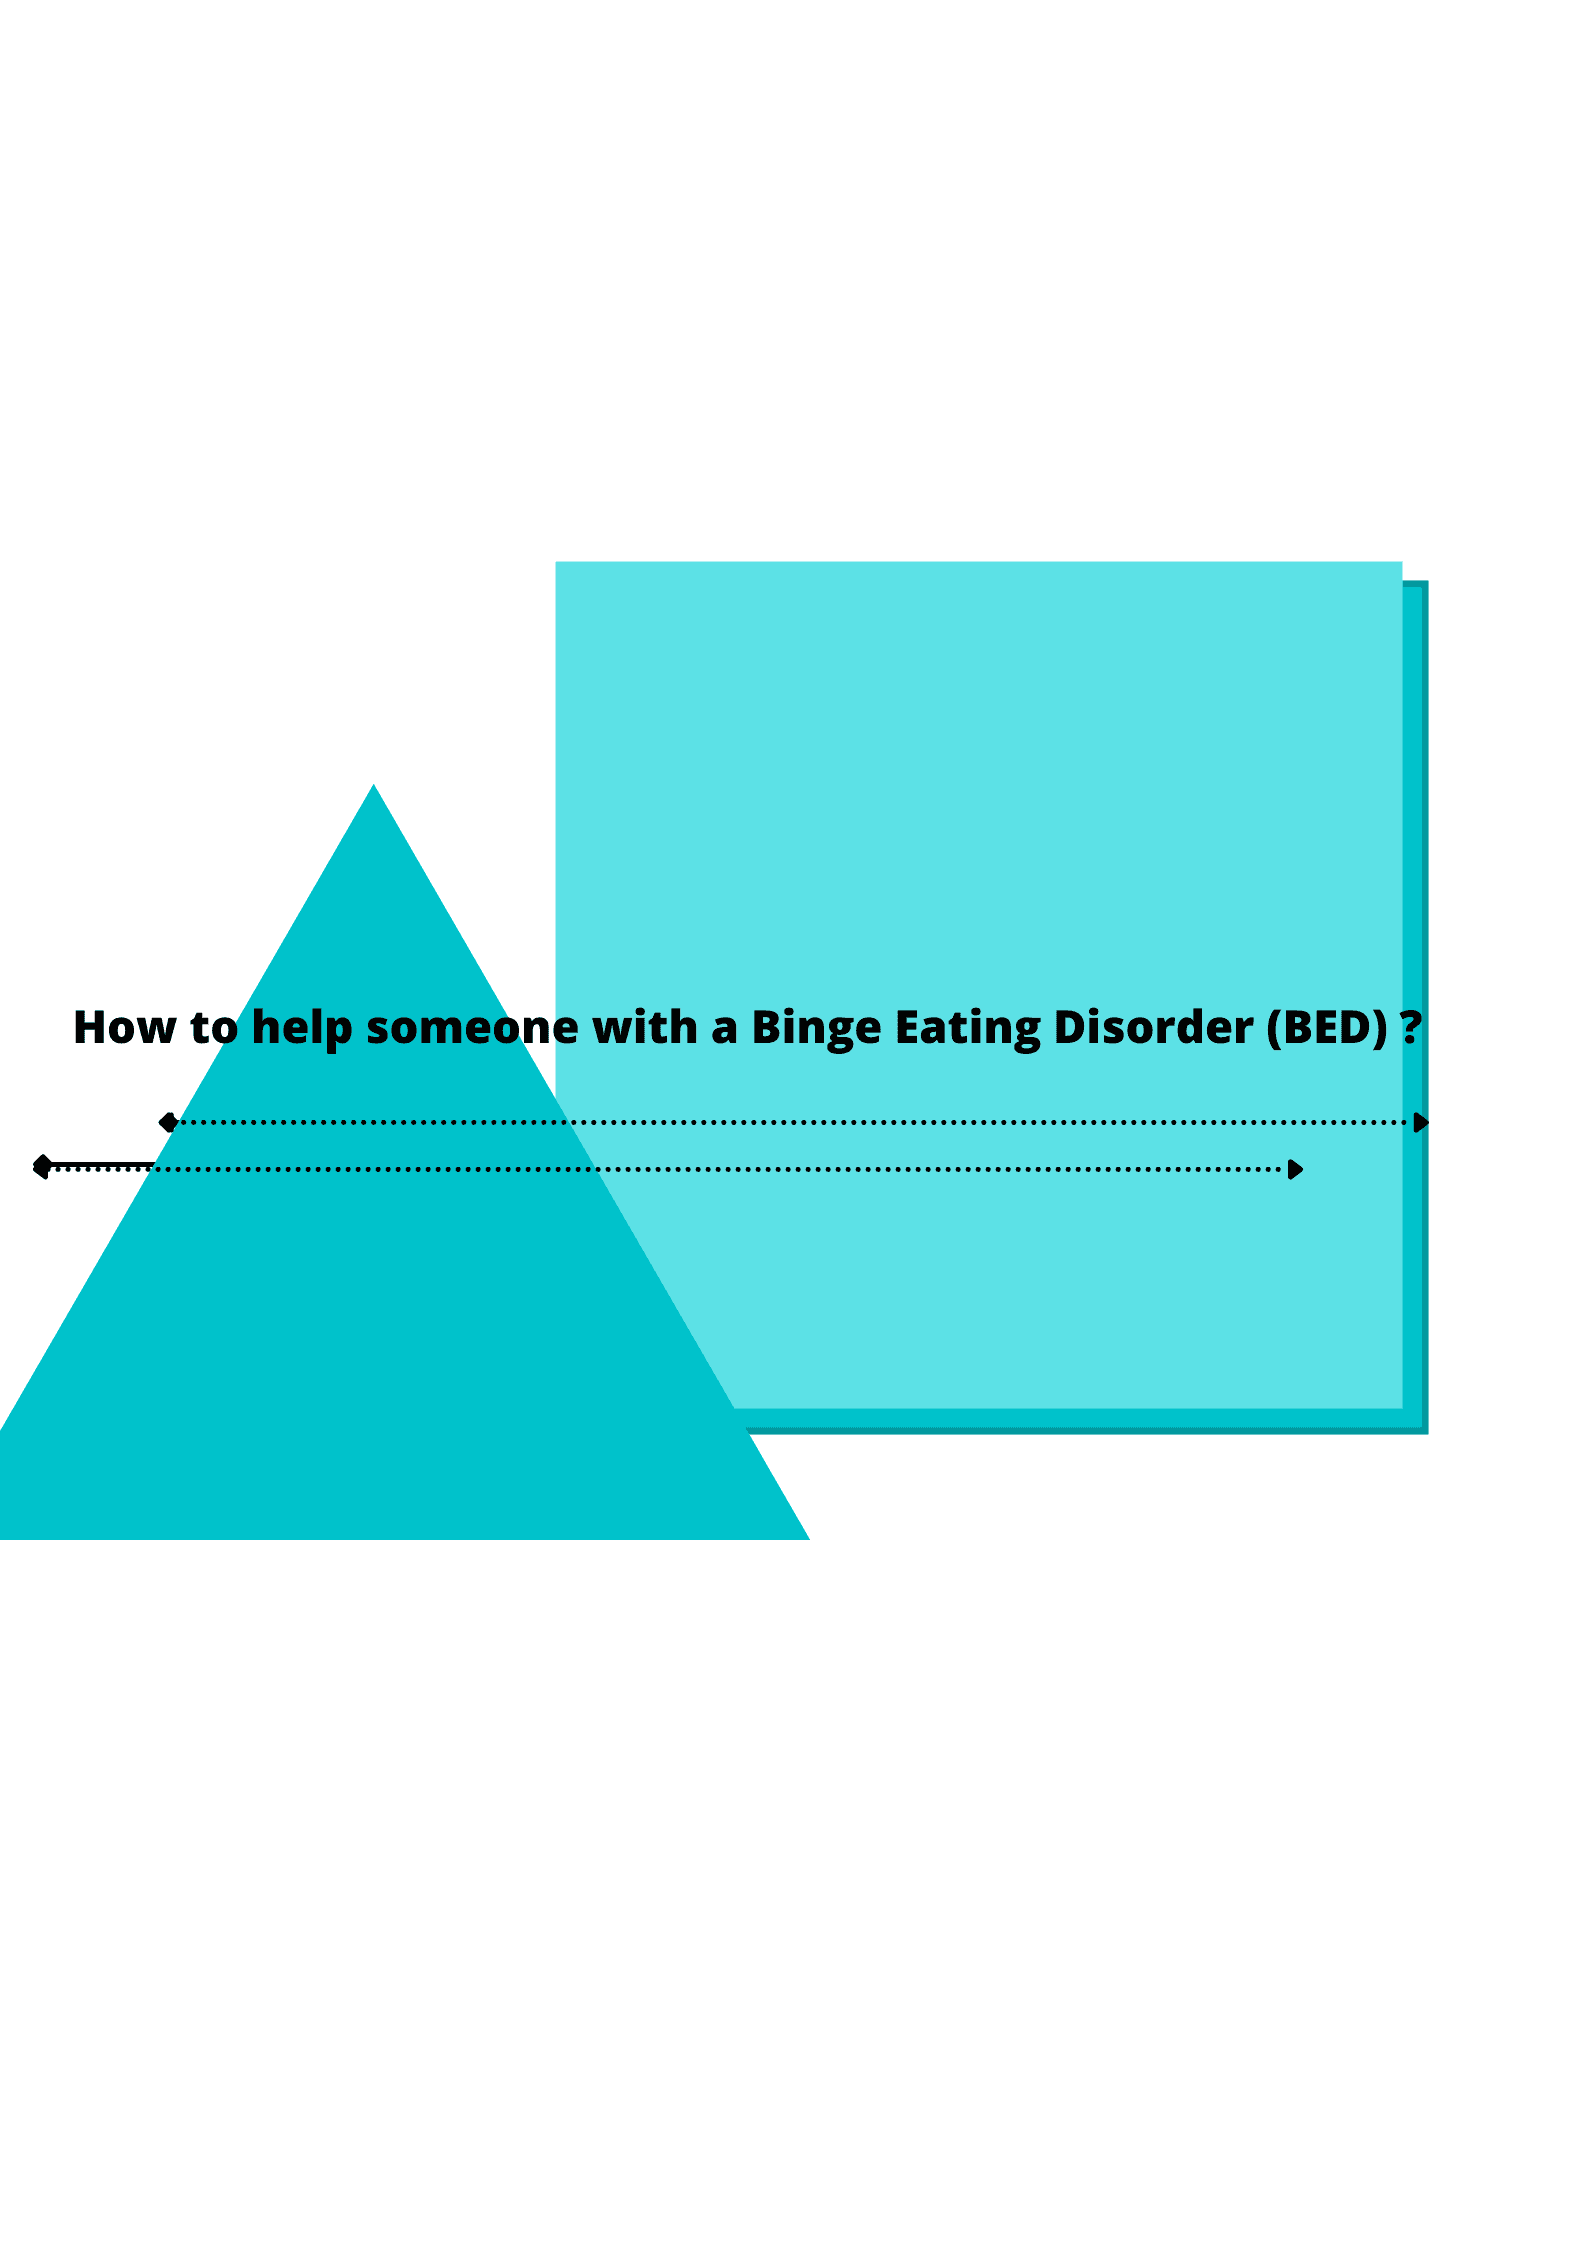 Tips for helping a person with Binge Eating Disorder